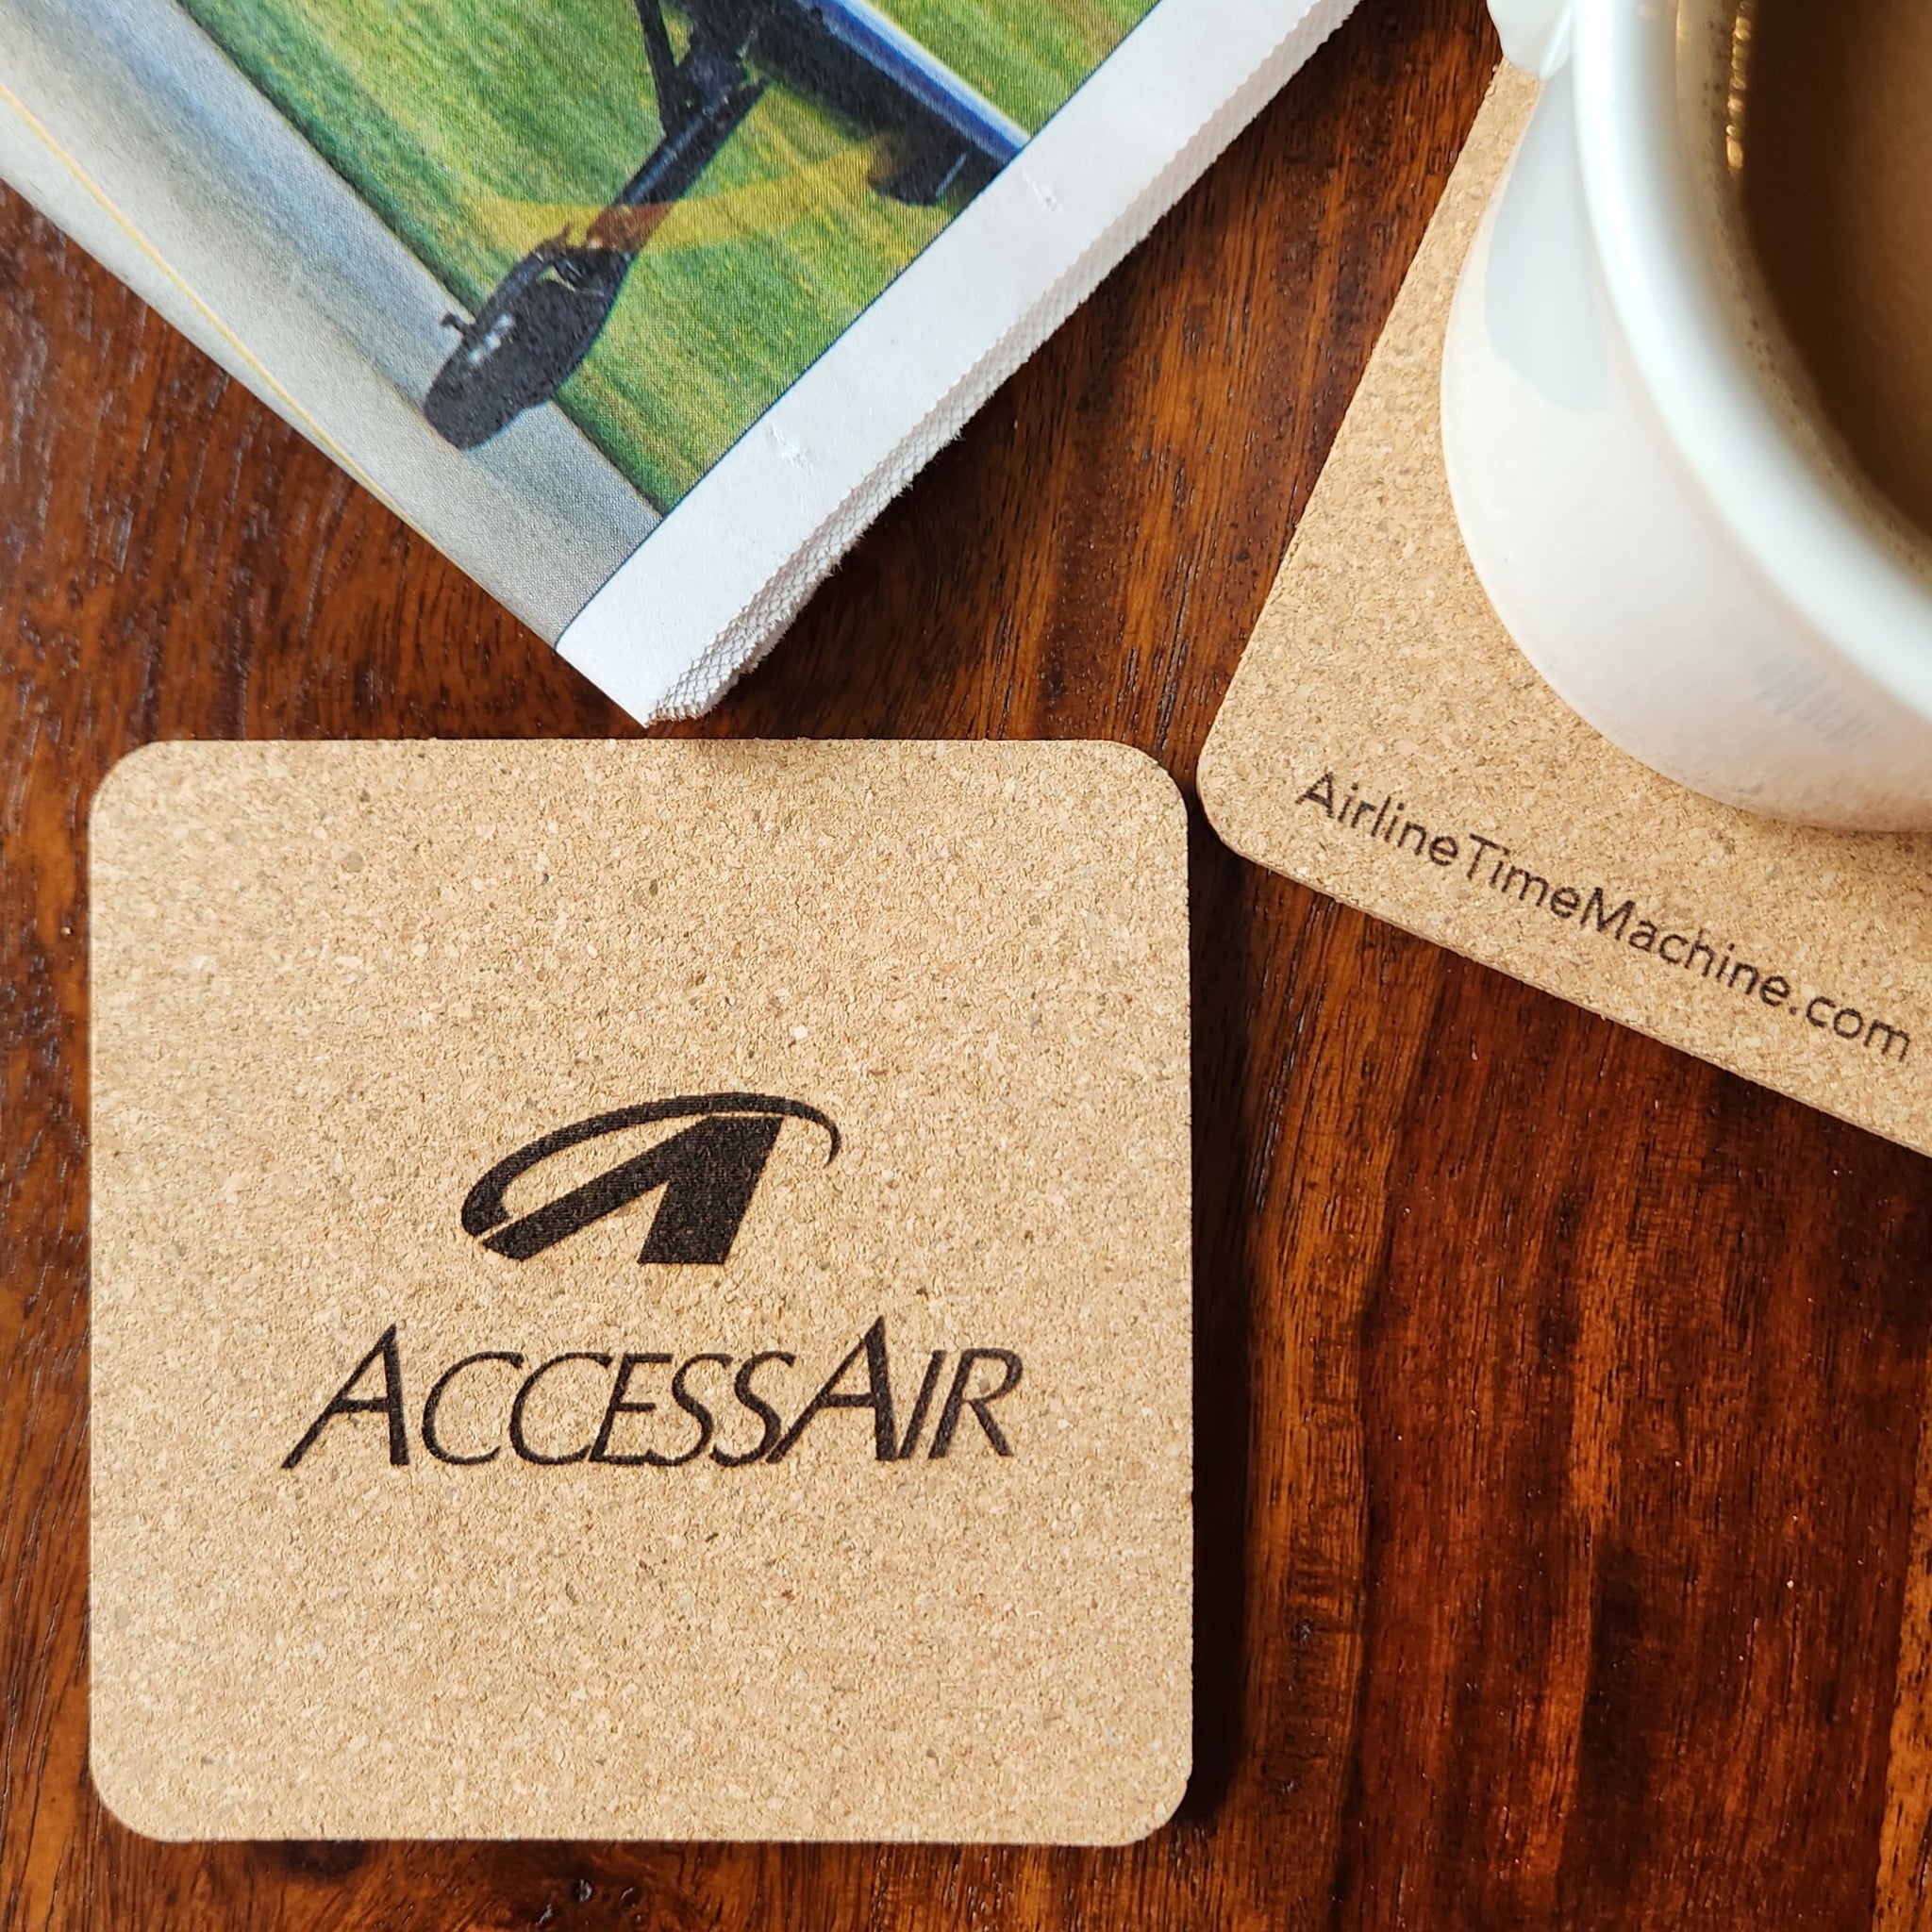 Image of cork coaster with AccessAir branding impression.